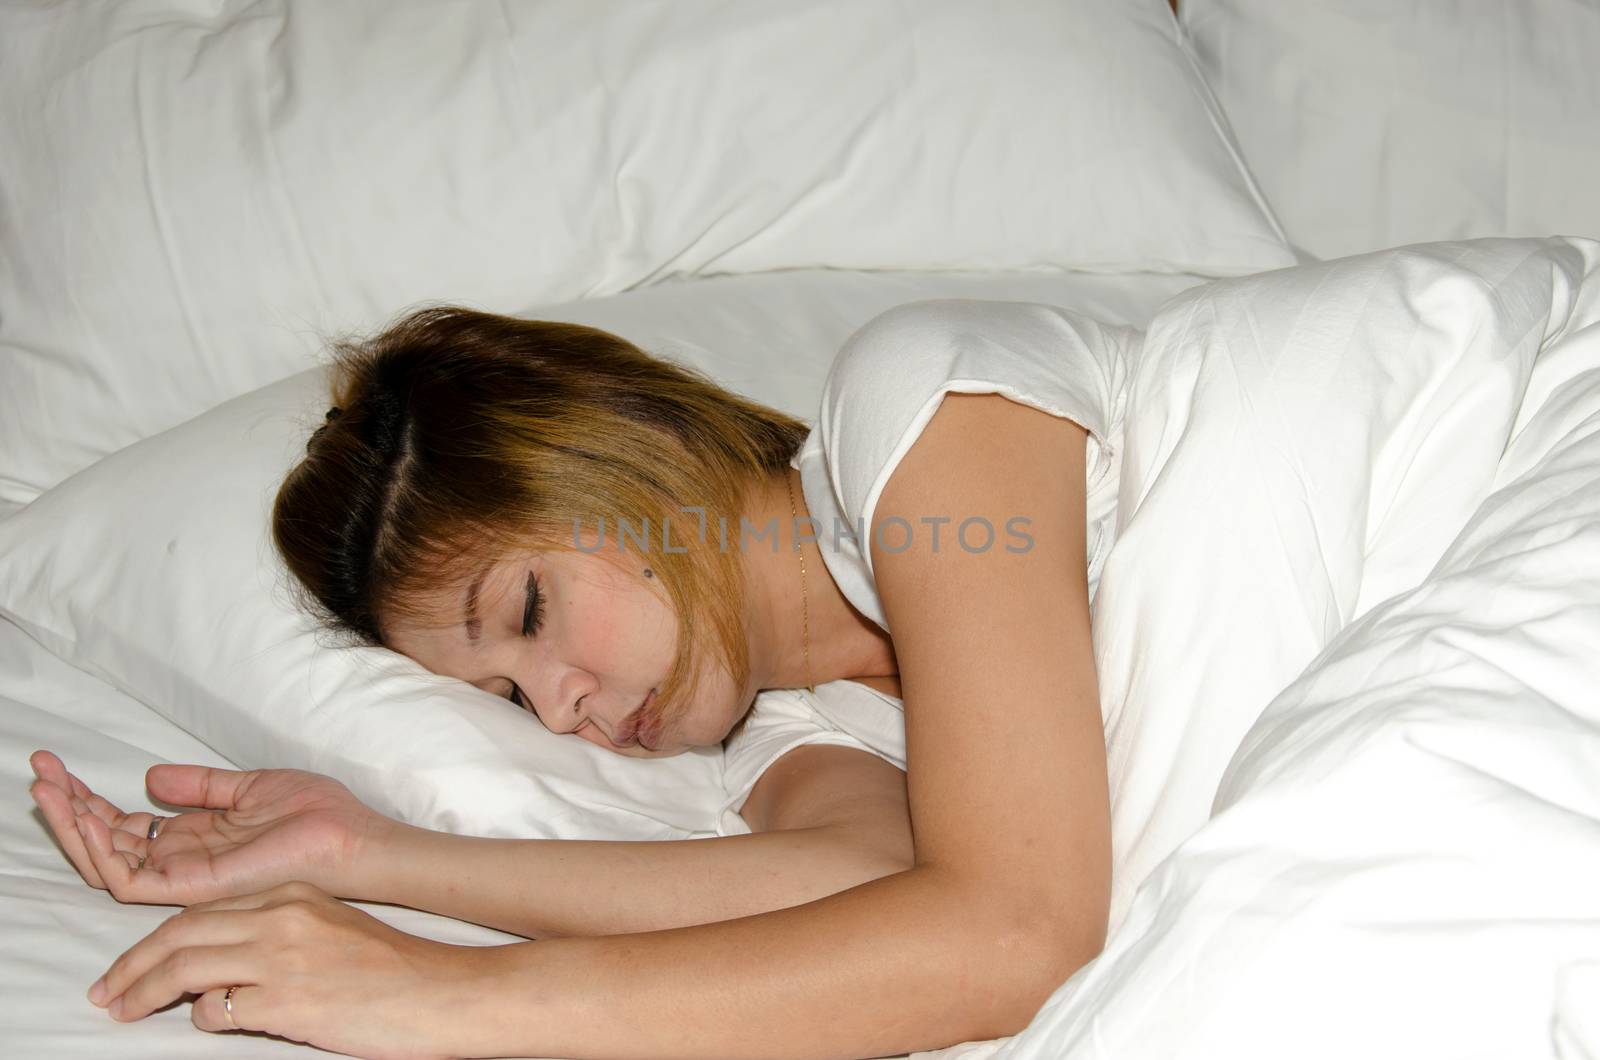 Of Asia woman sleeping on white bed.